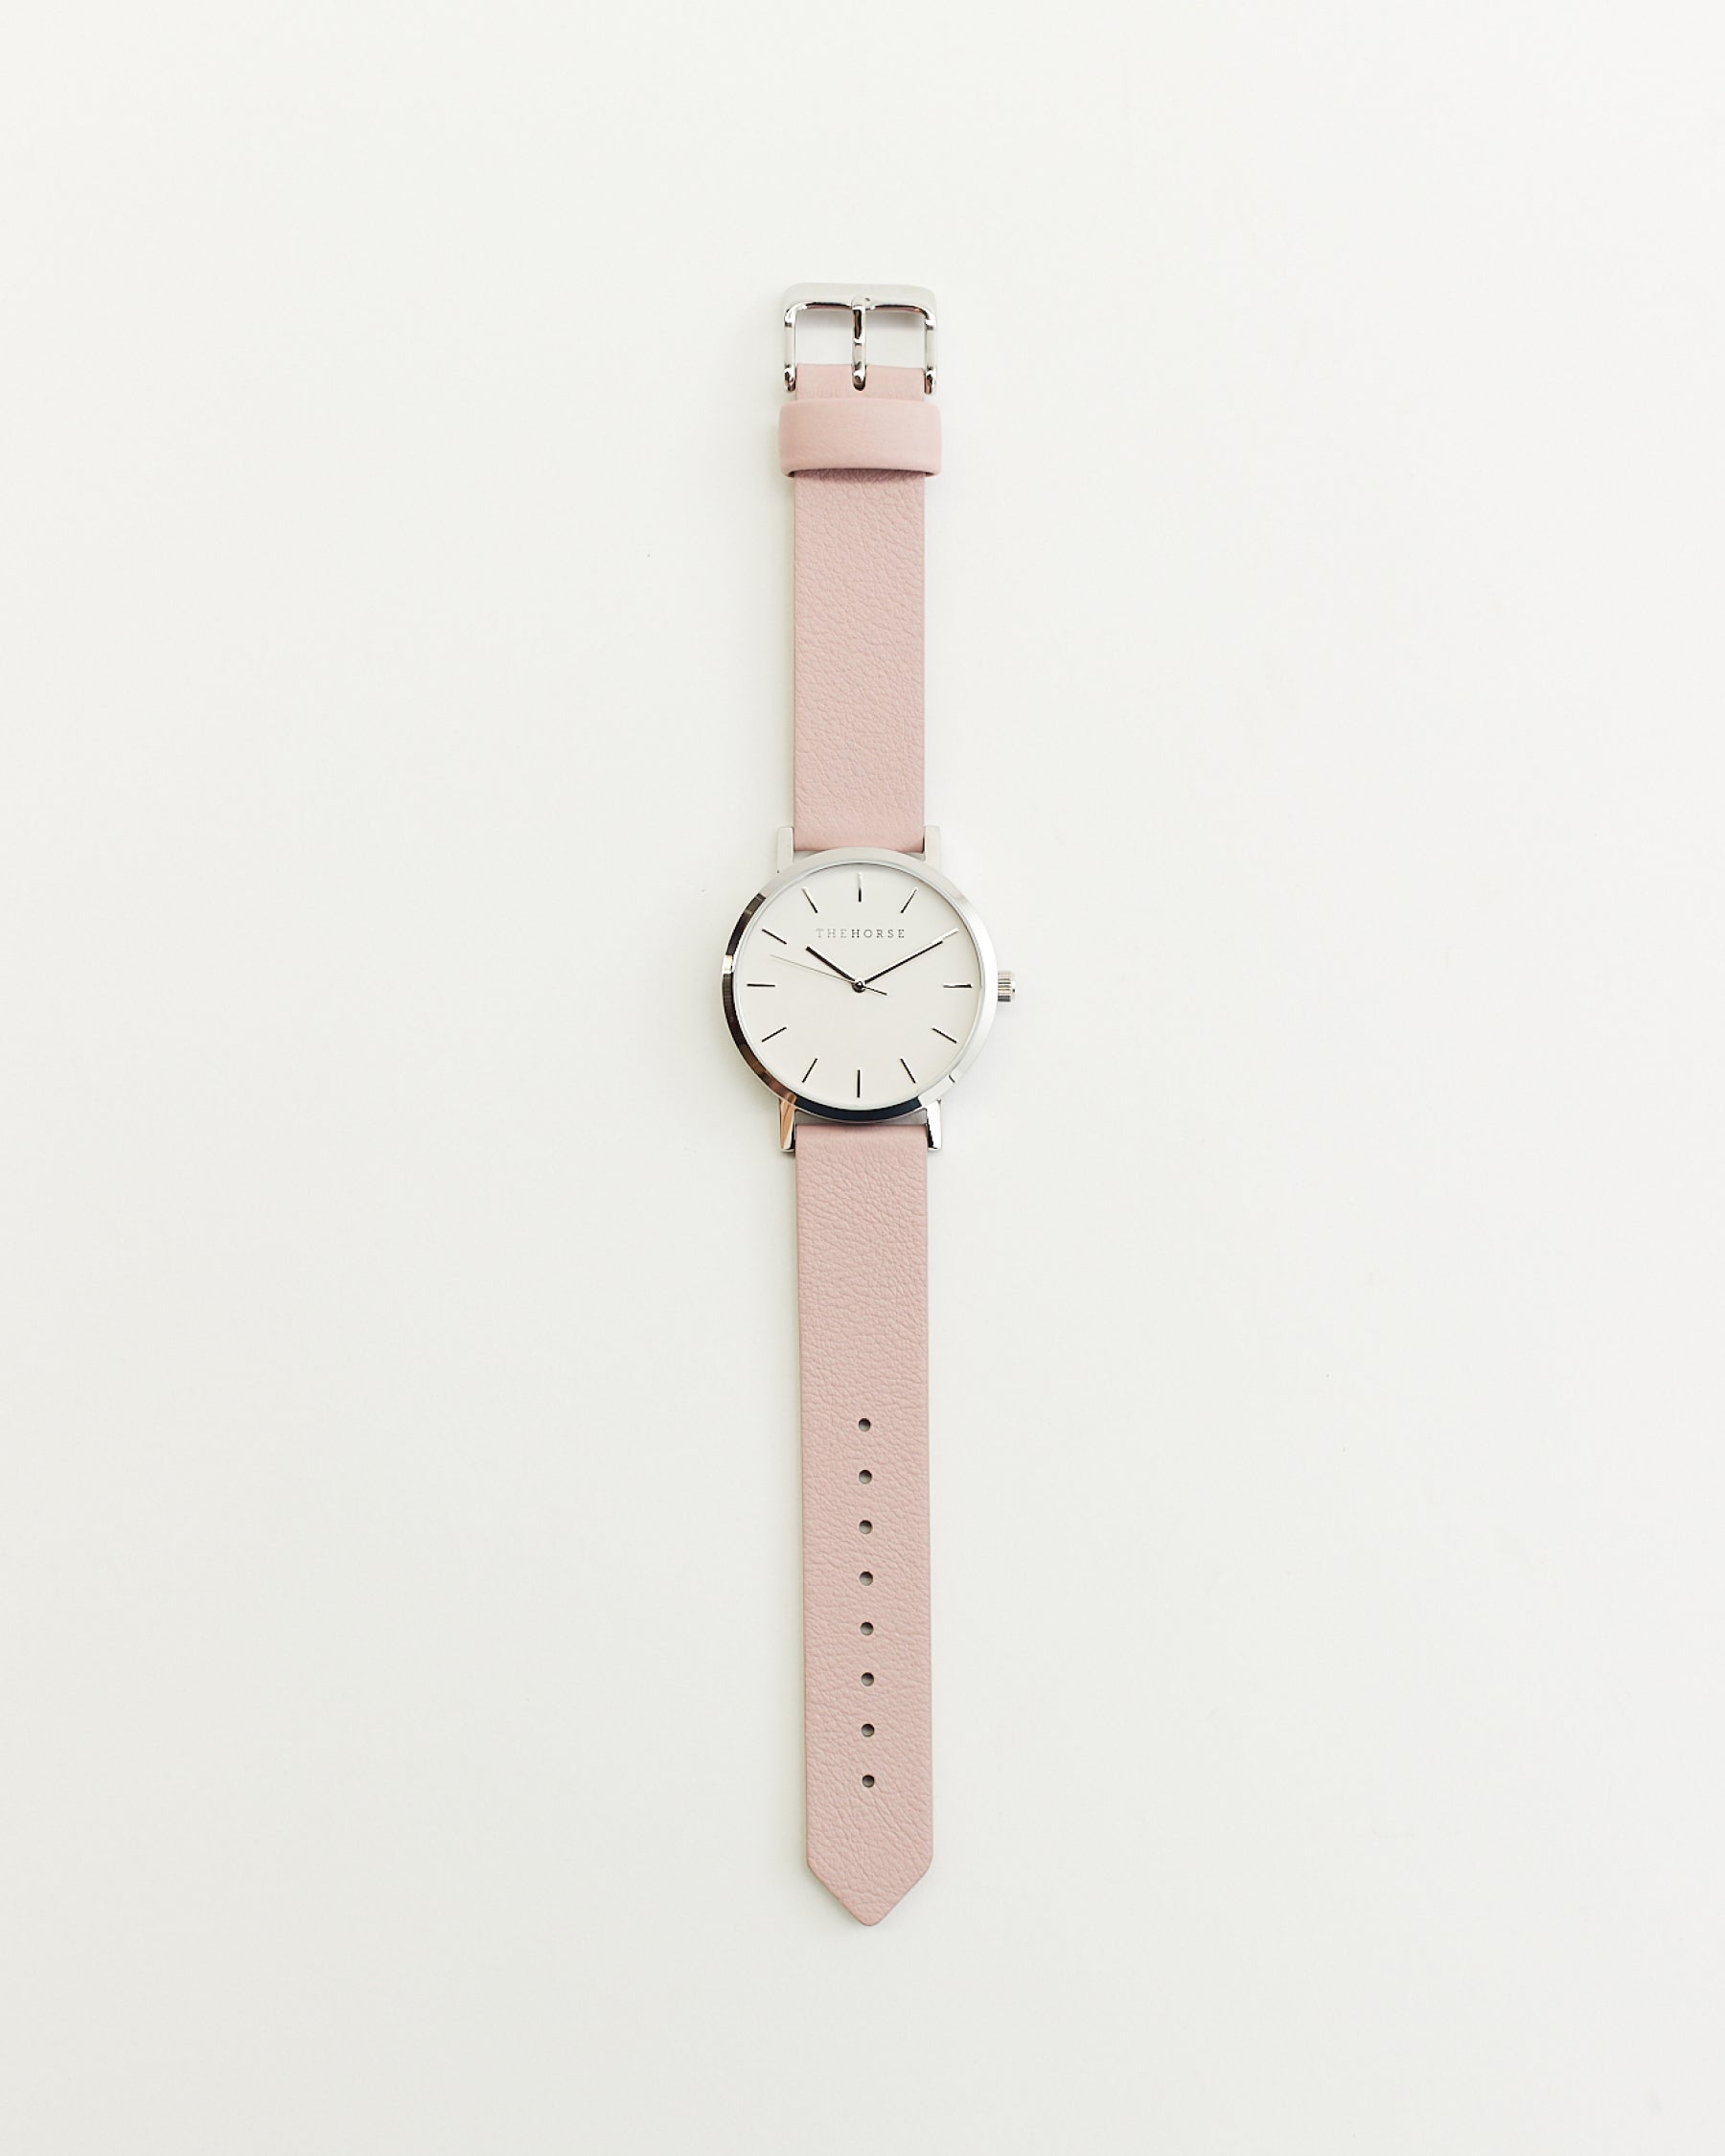 The Mini Original: Polished Silver Case / White Dial / Dirty Pink Leather